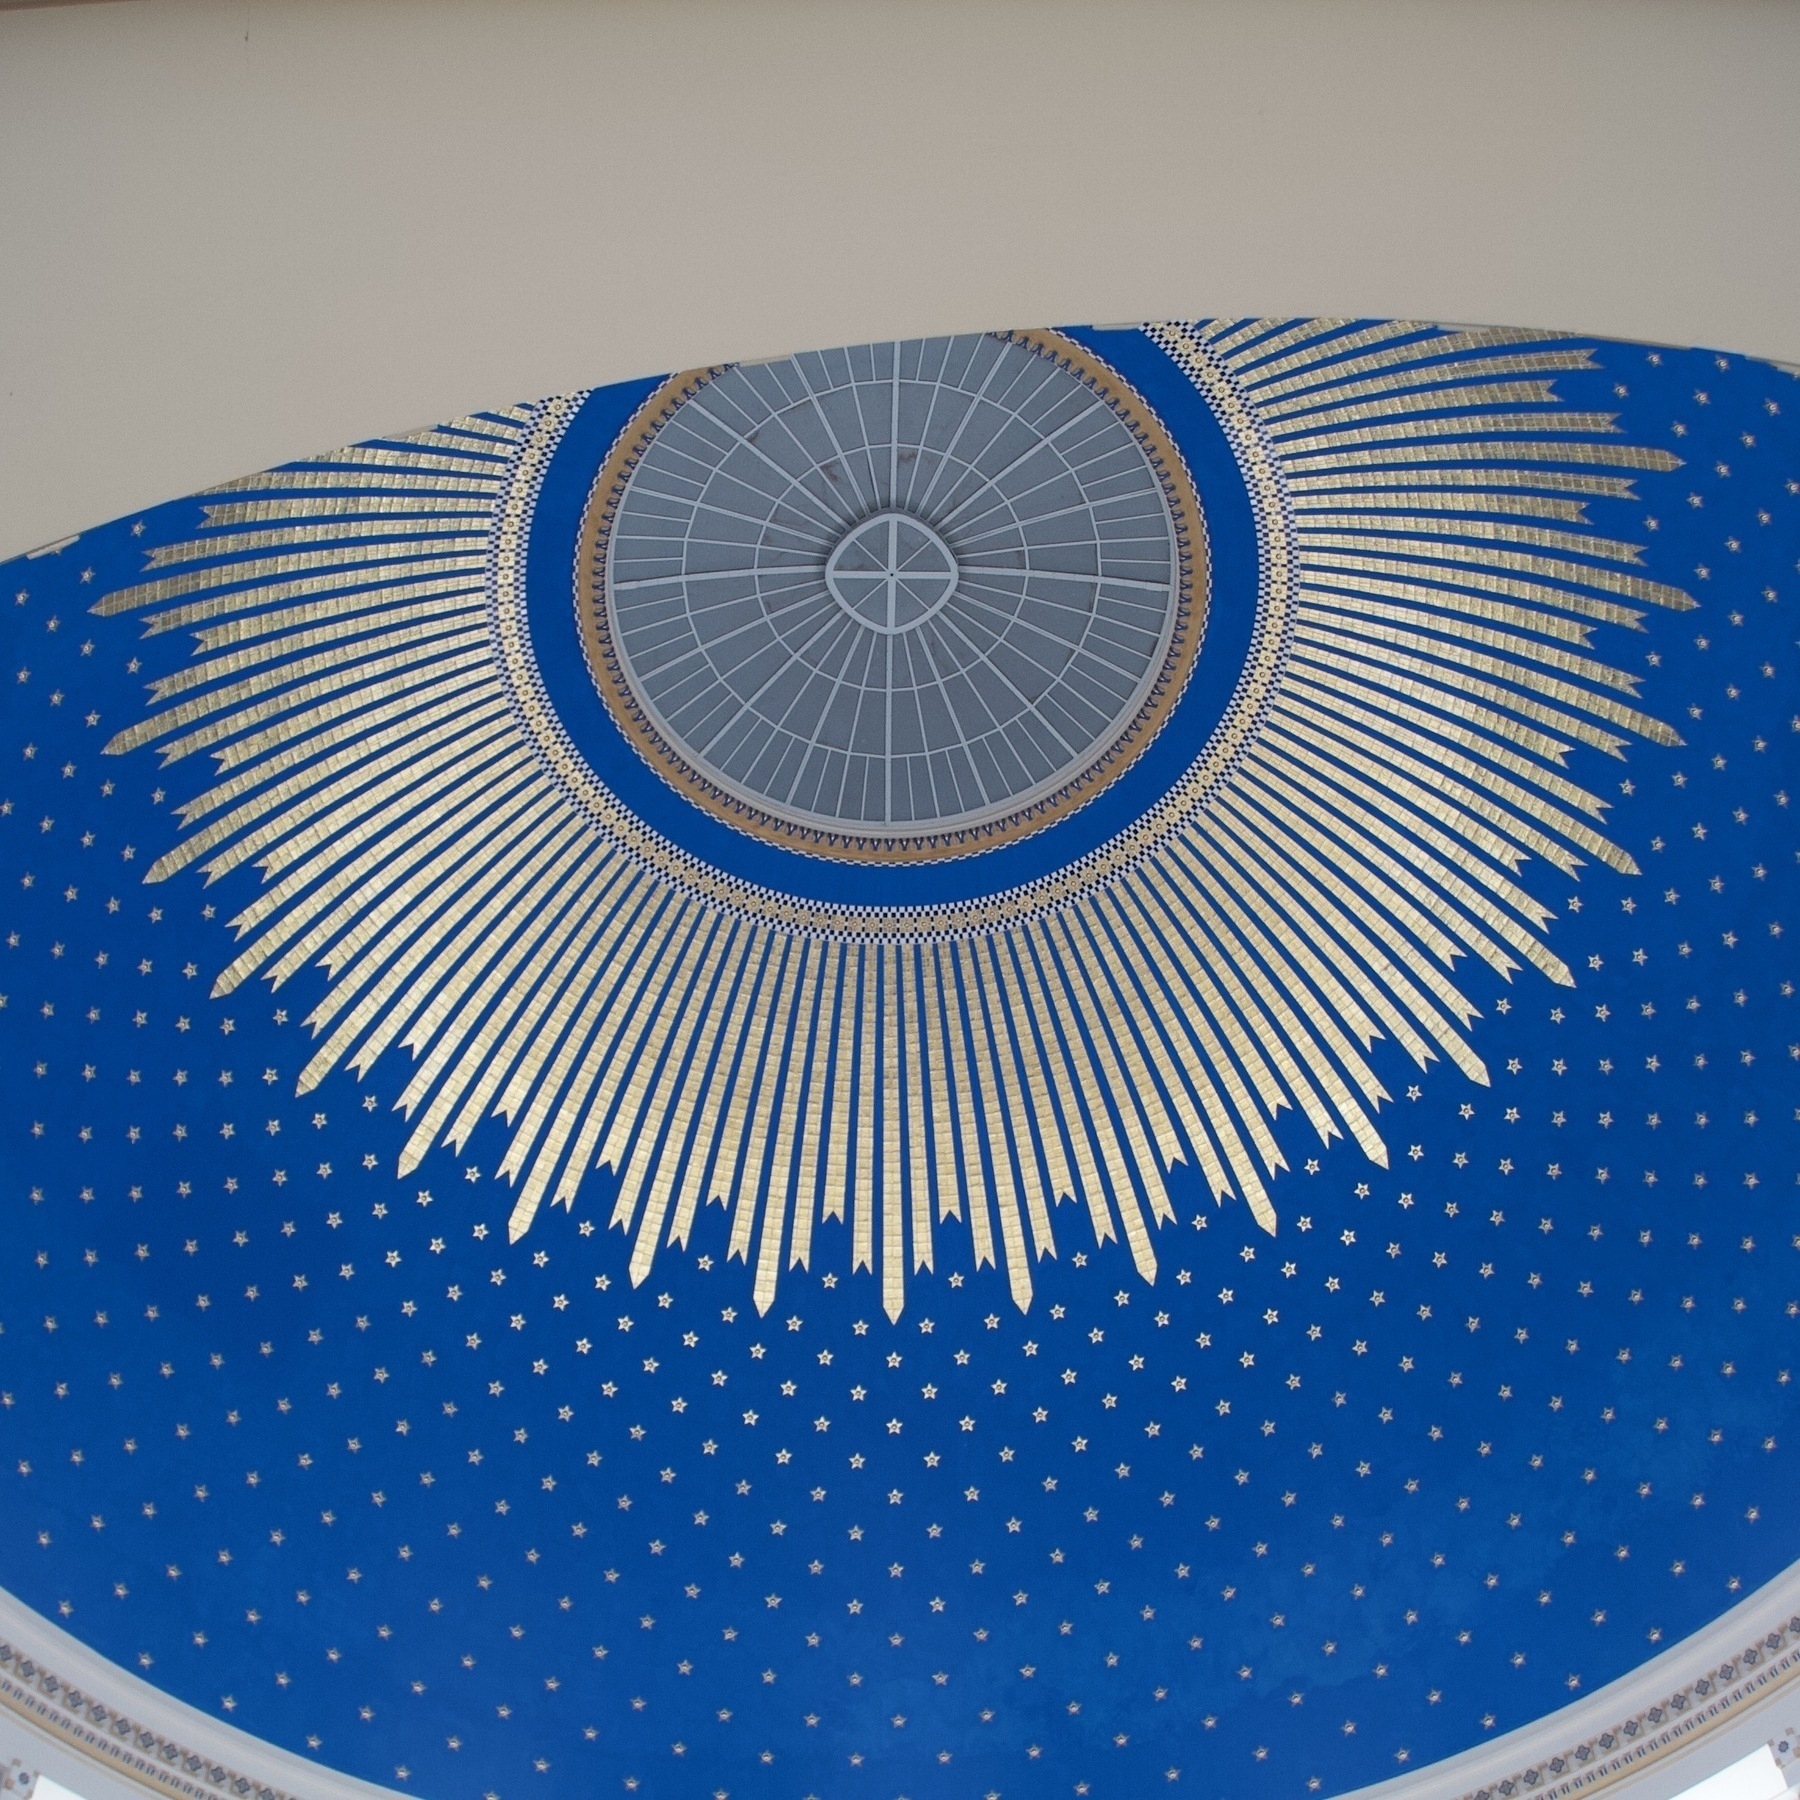 The ceiling of a dome painted in blue and gold.